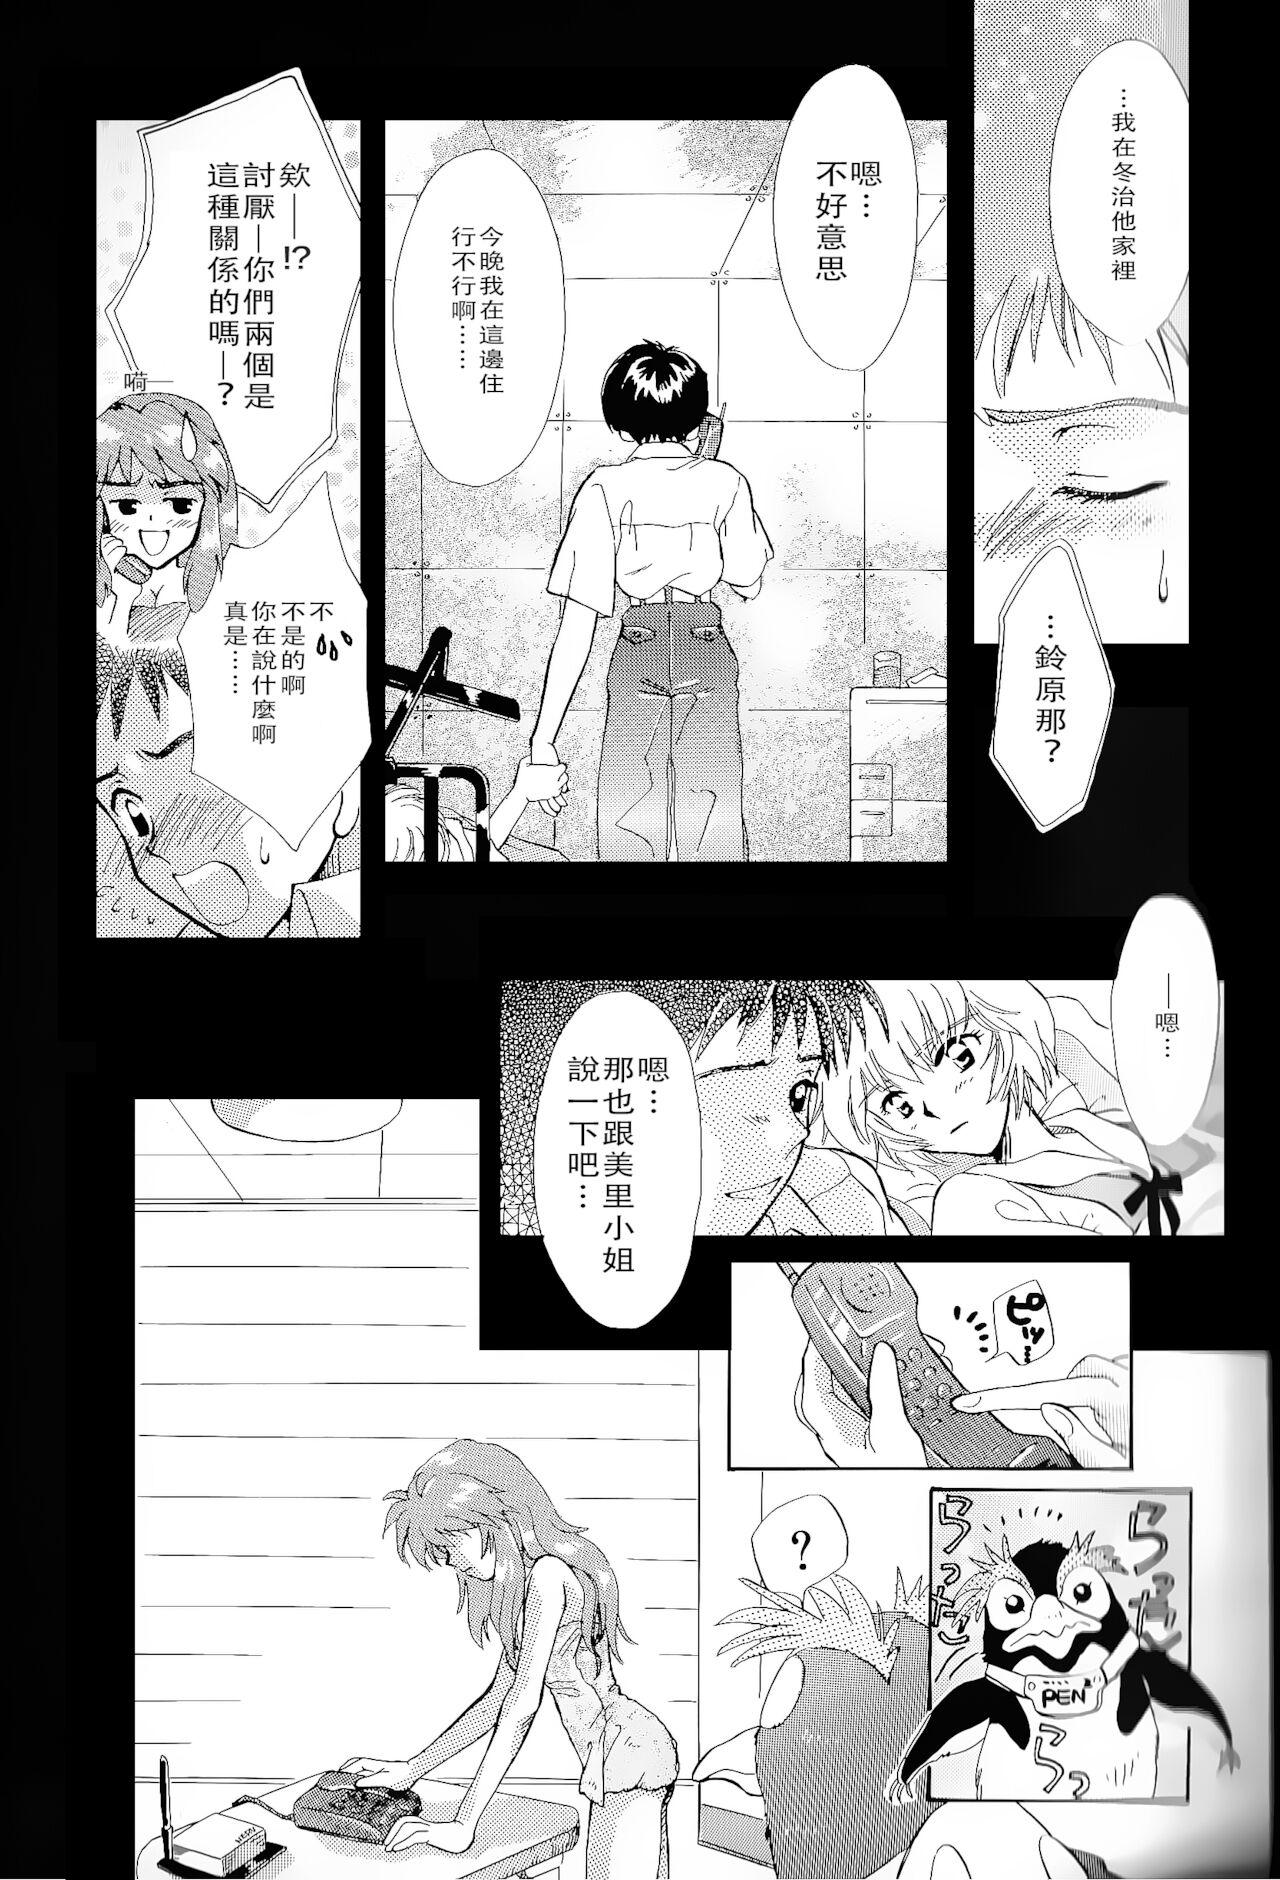 The PEPPY ANGEL episode0.1 - Neon genesis evangelion Pure 18 - Page 12